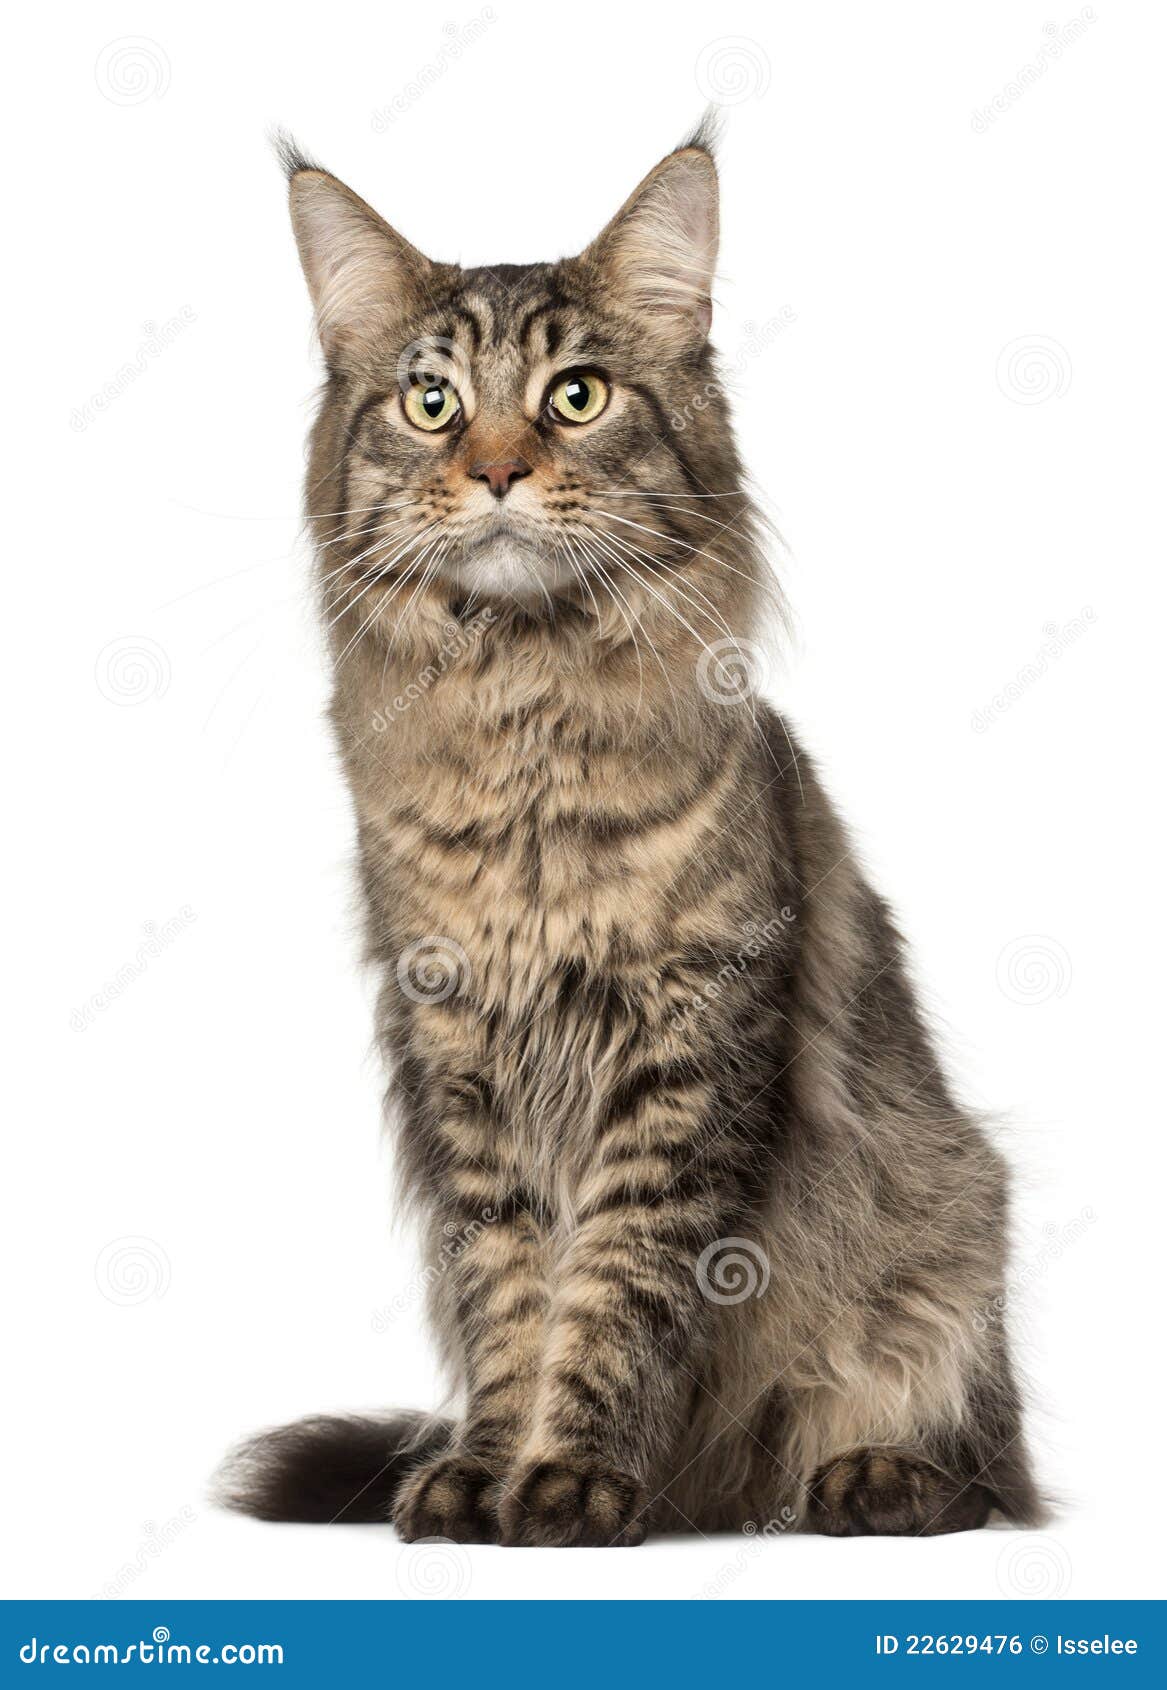 maine coon cat, 2 years old, sitting